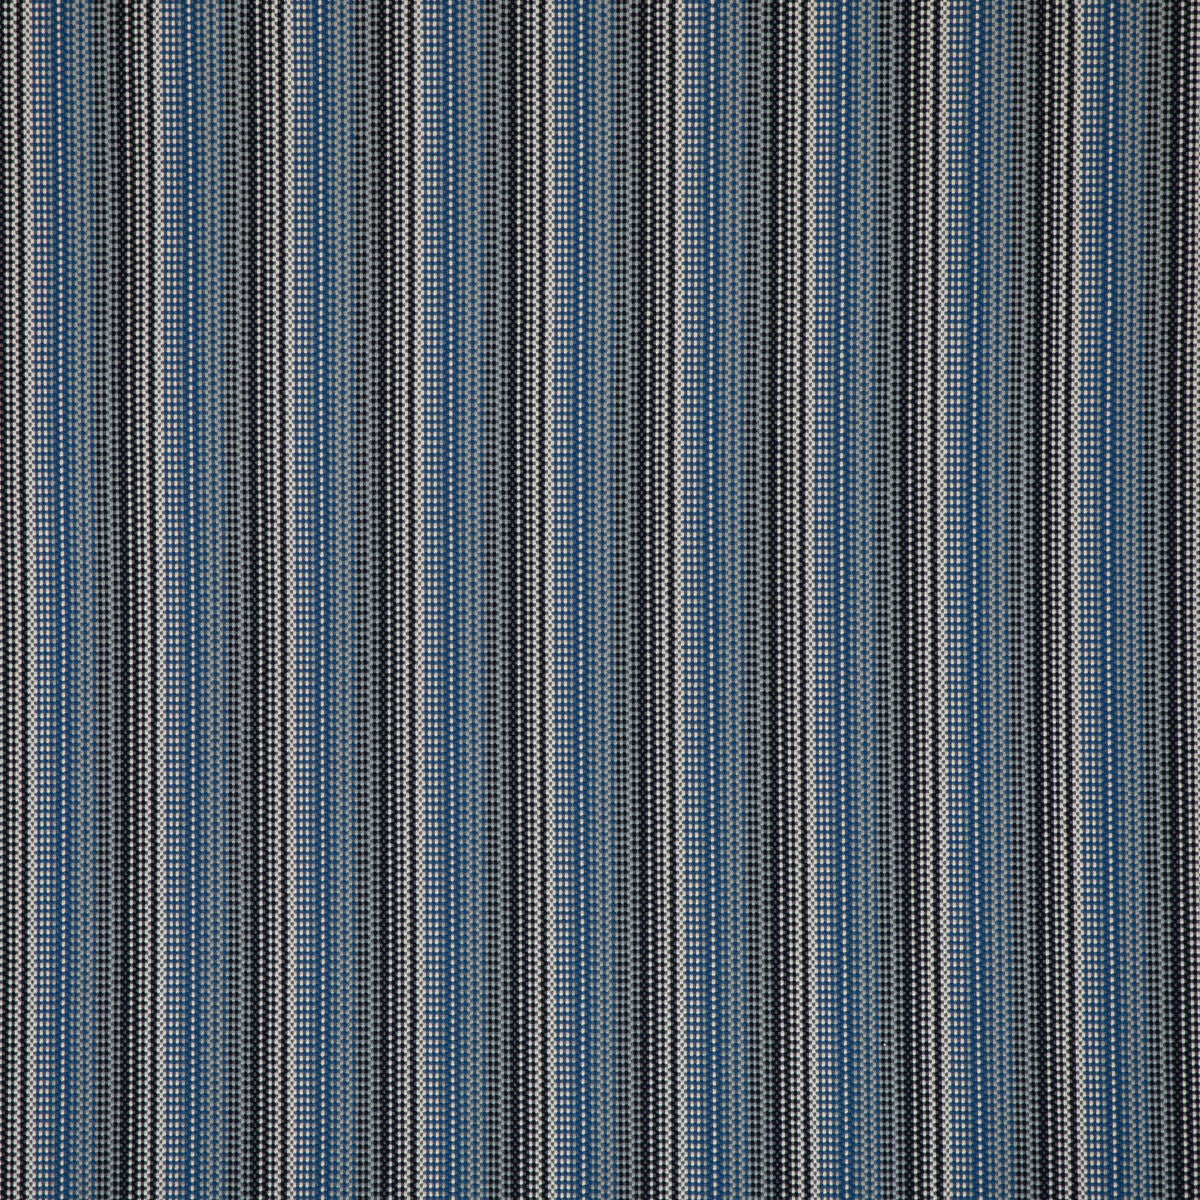 Baystreet fabric in coastal color - pattern 37068.521.0 - by Kravet Contract in the Chesapeake collection